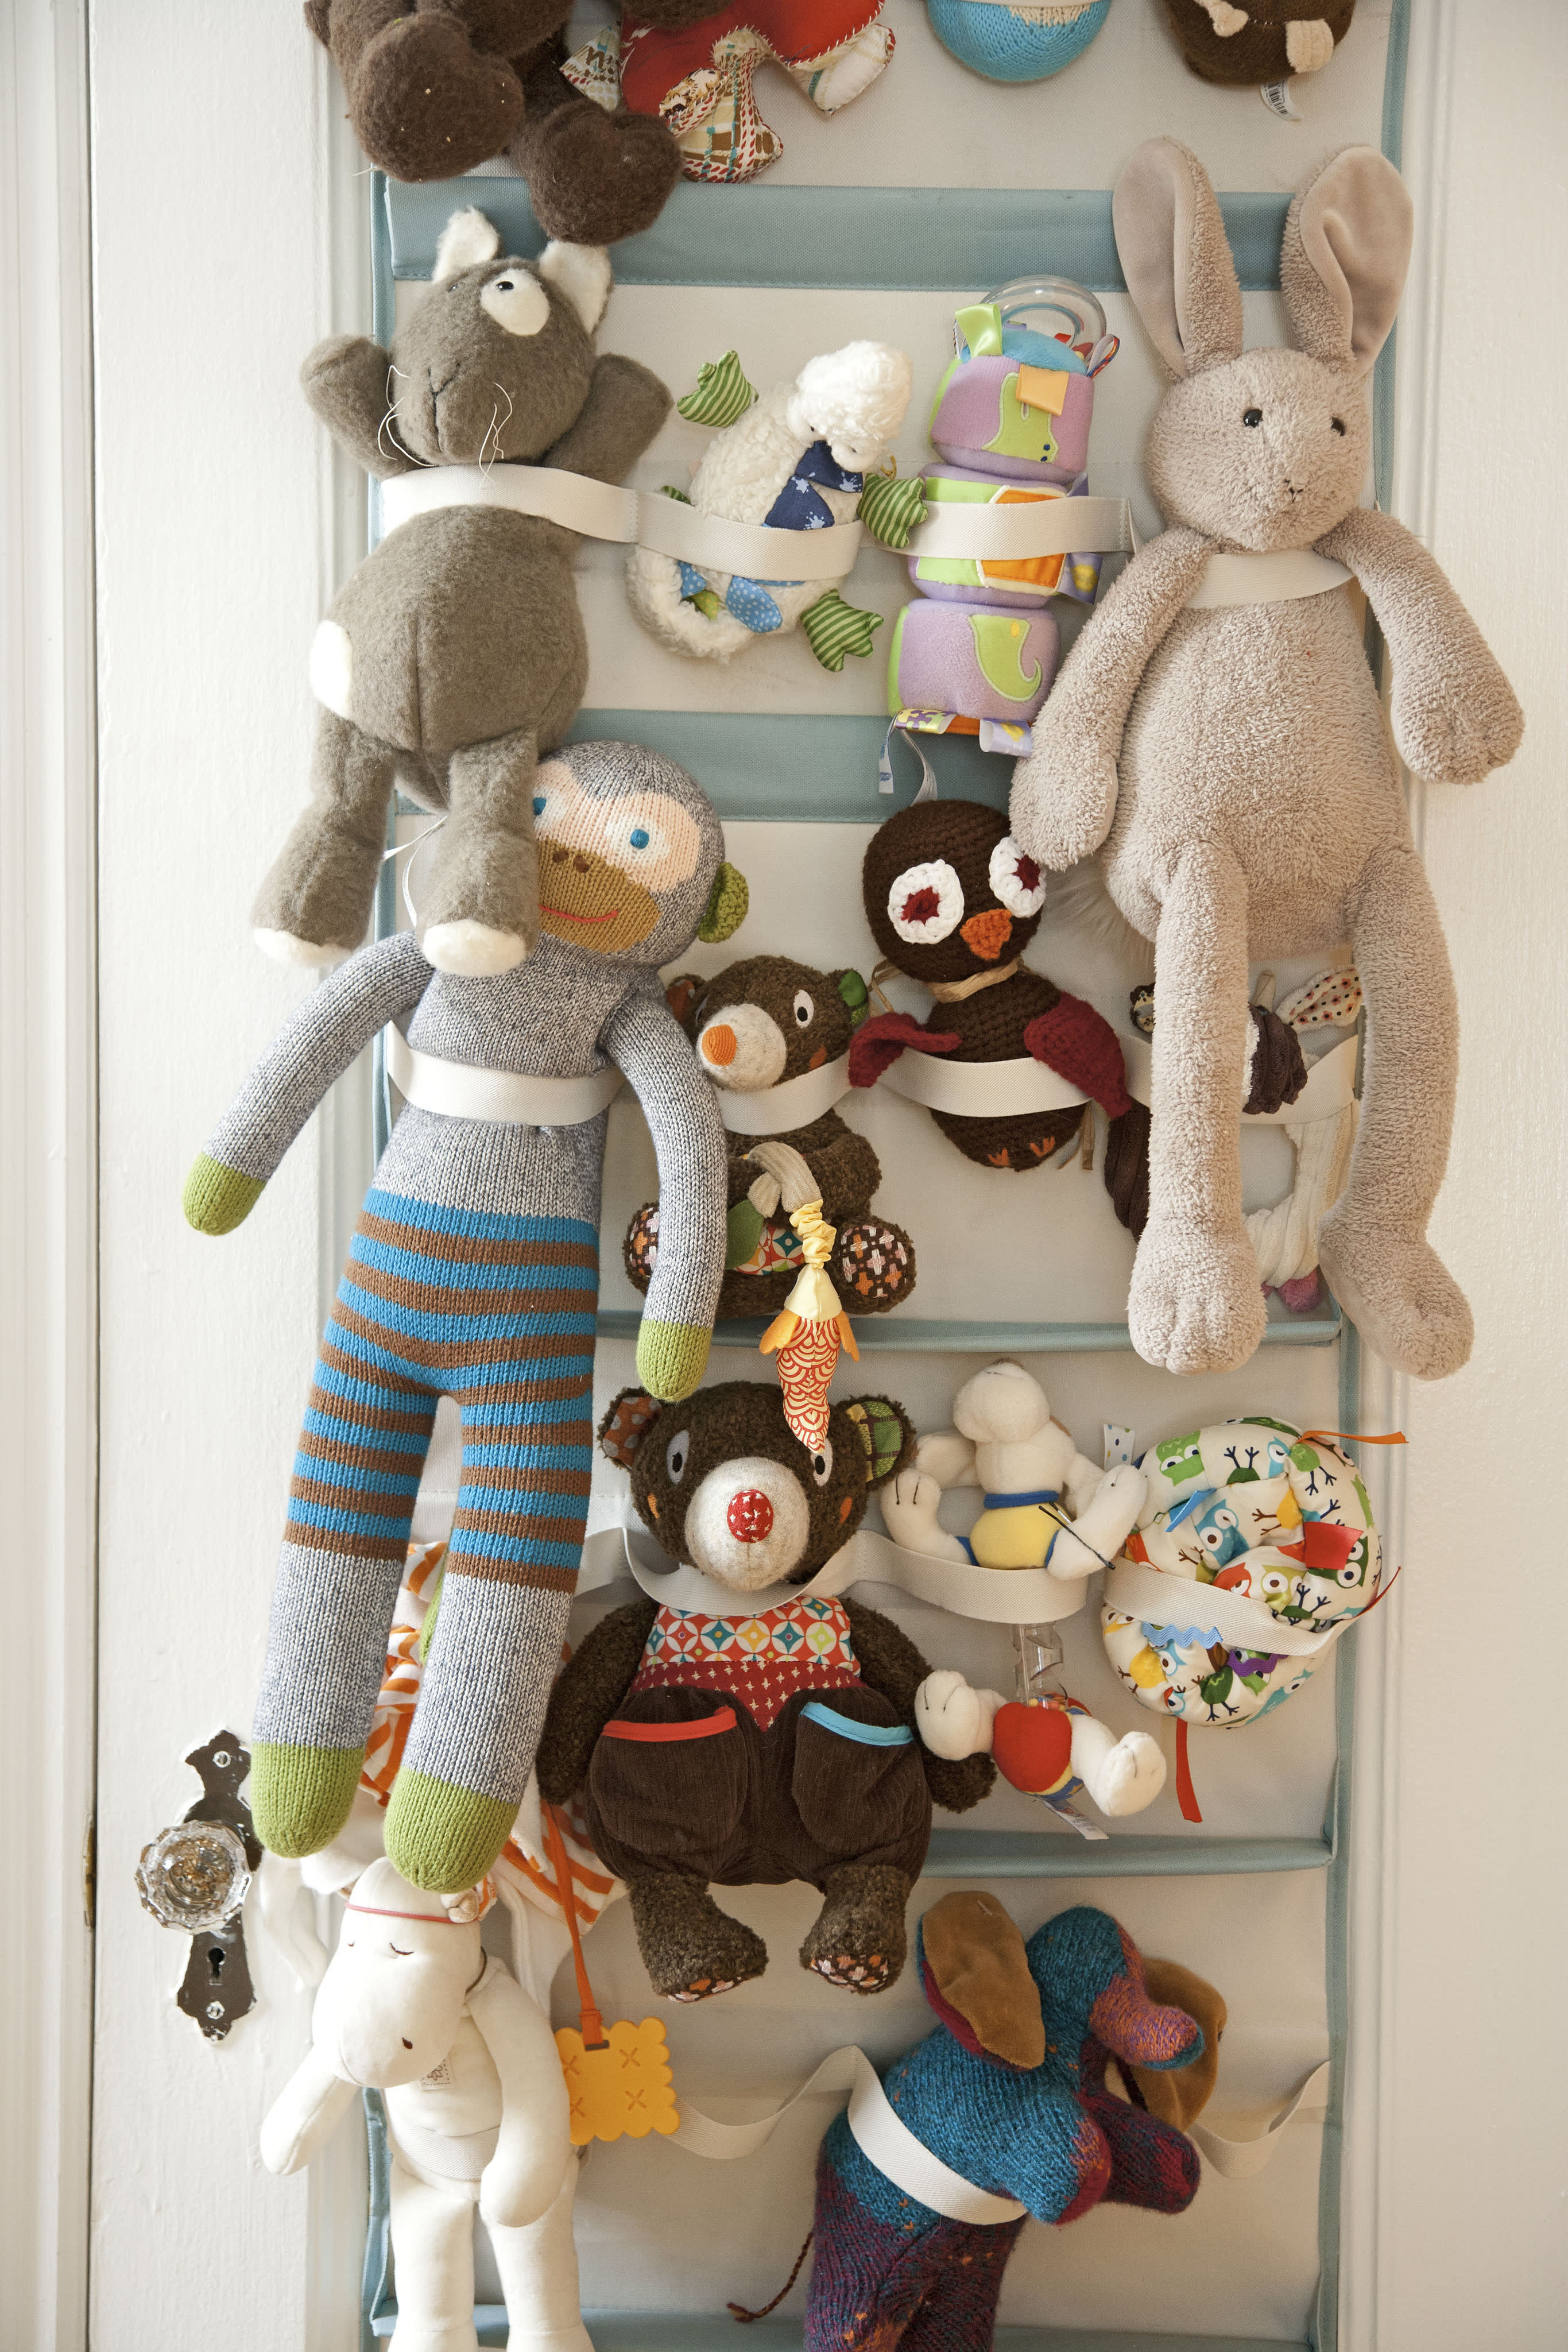 10 Clever Ways to Store Stuffed Animal Collections | Apartment Therapy